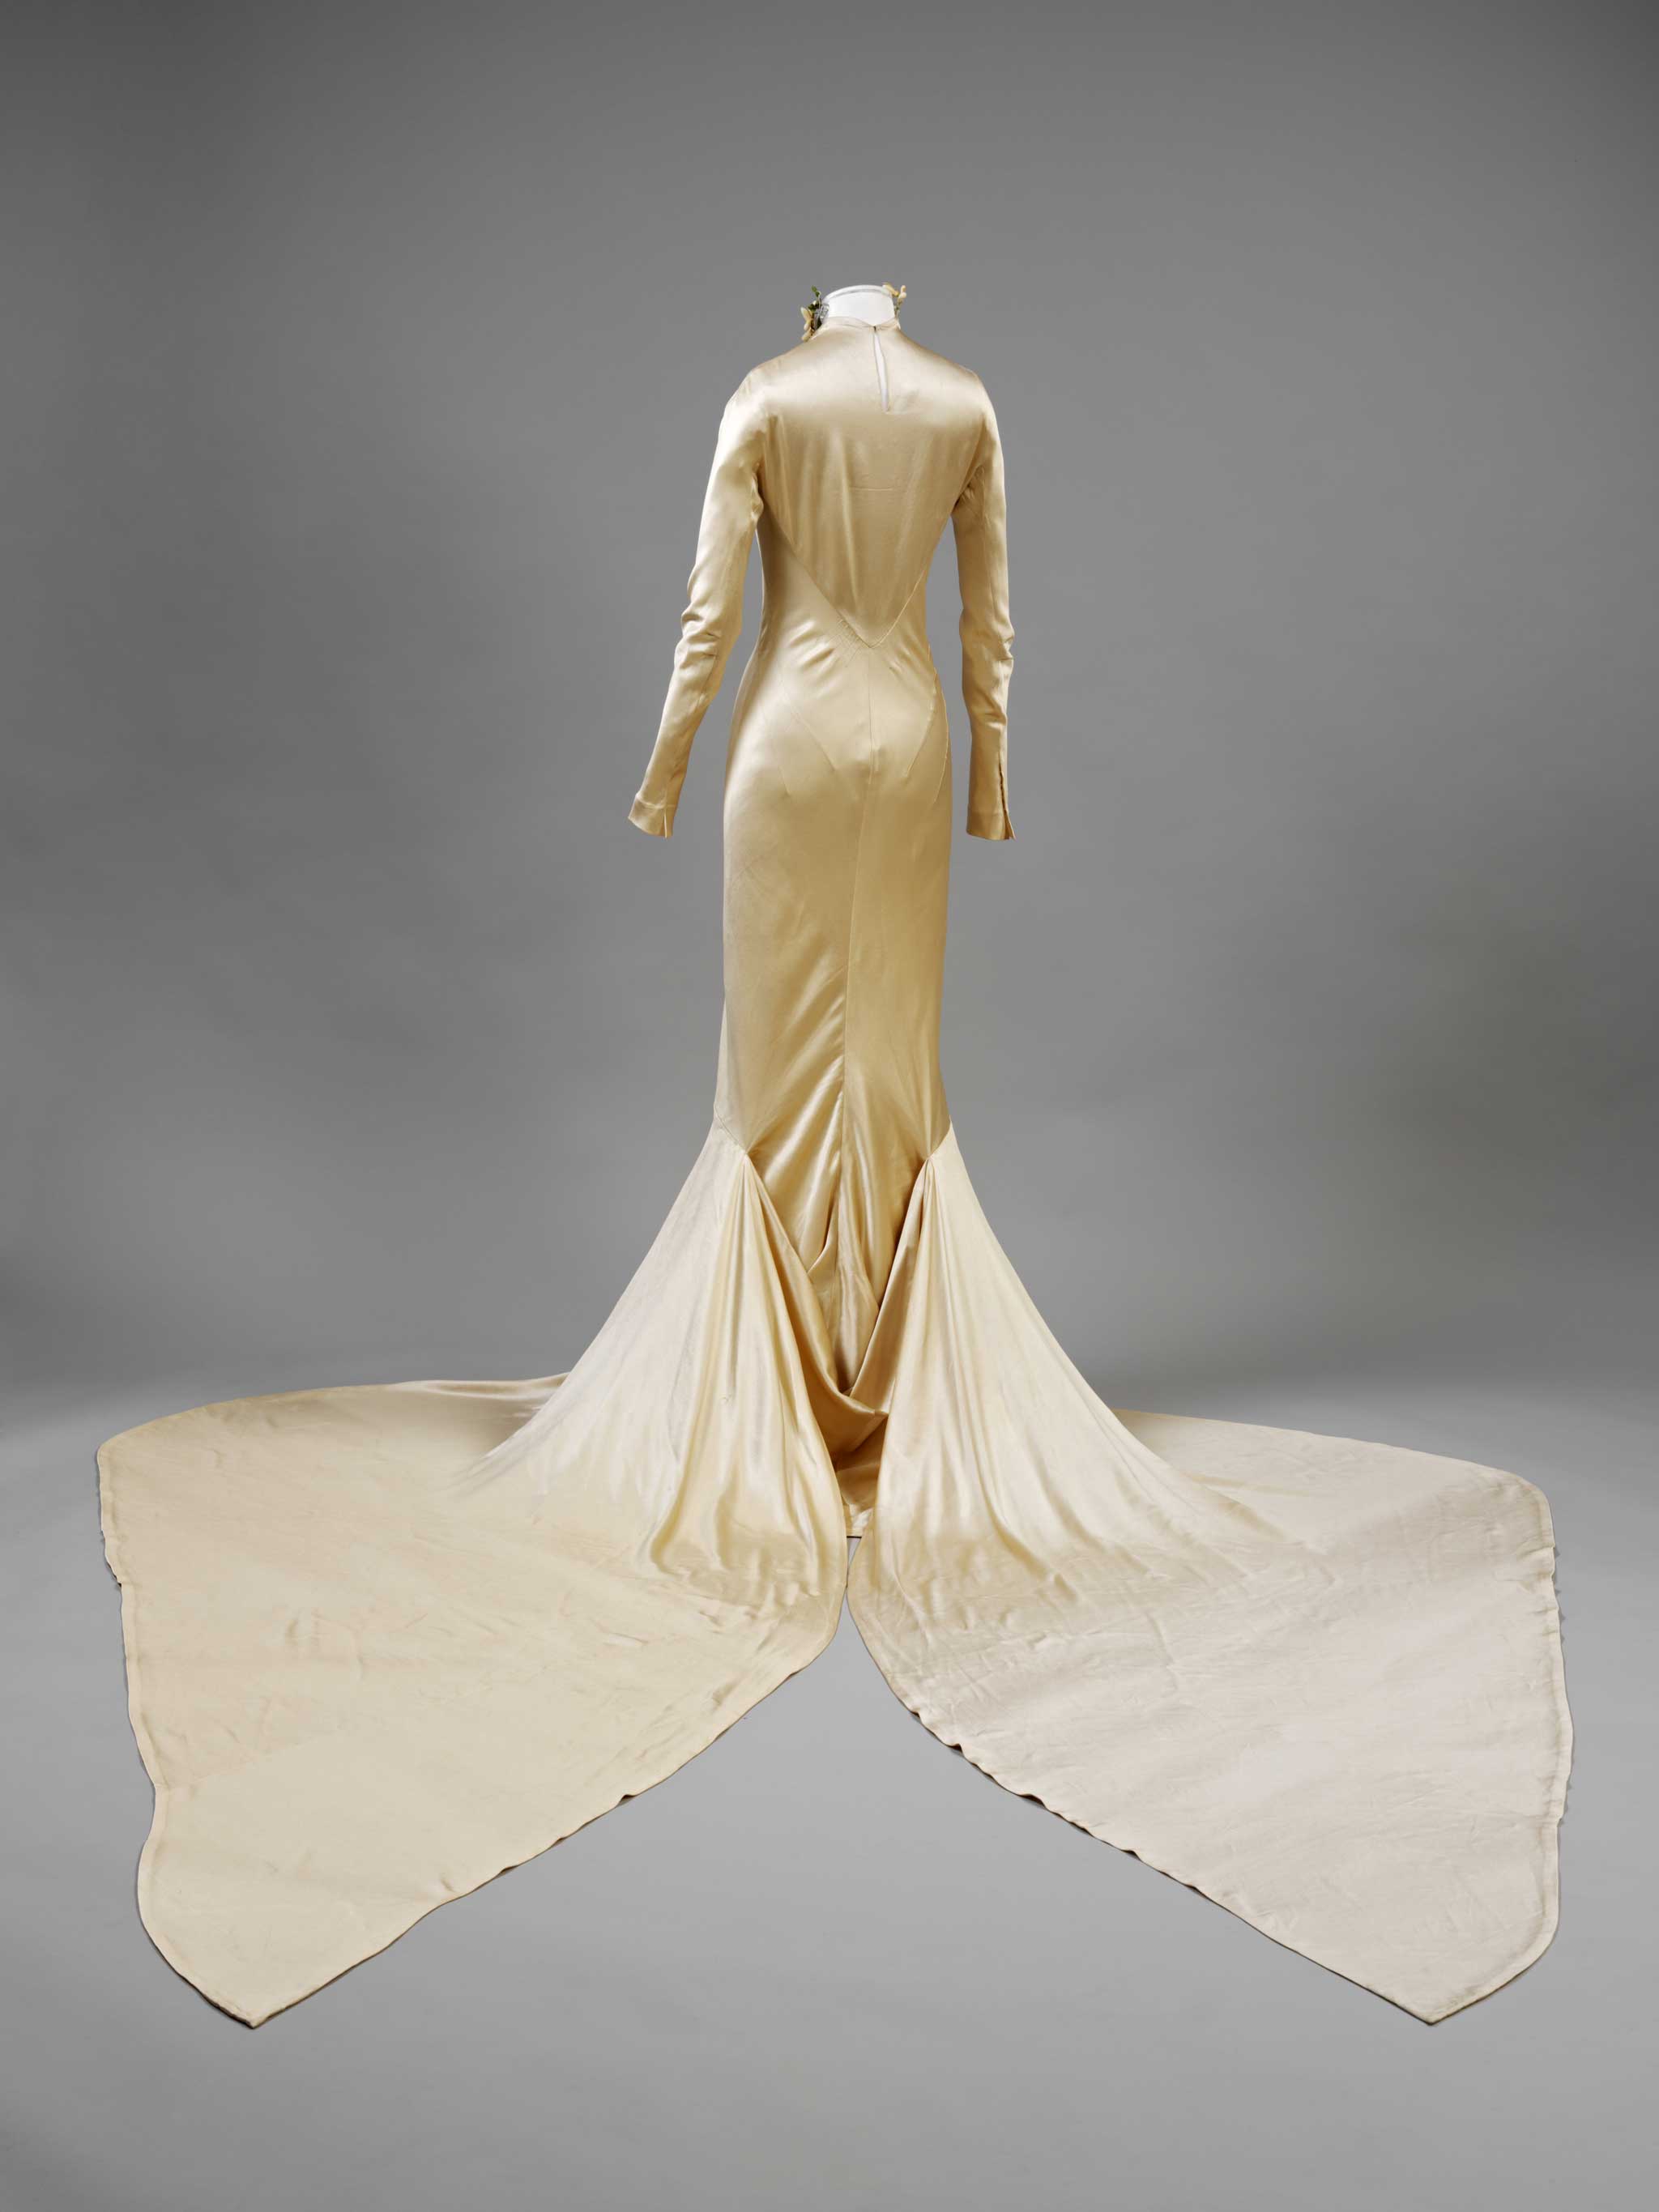 The V&A is to host a wedding dress exhibition